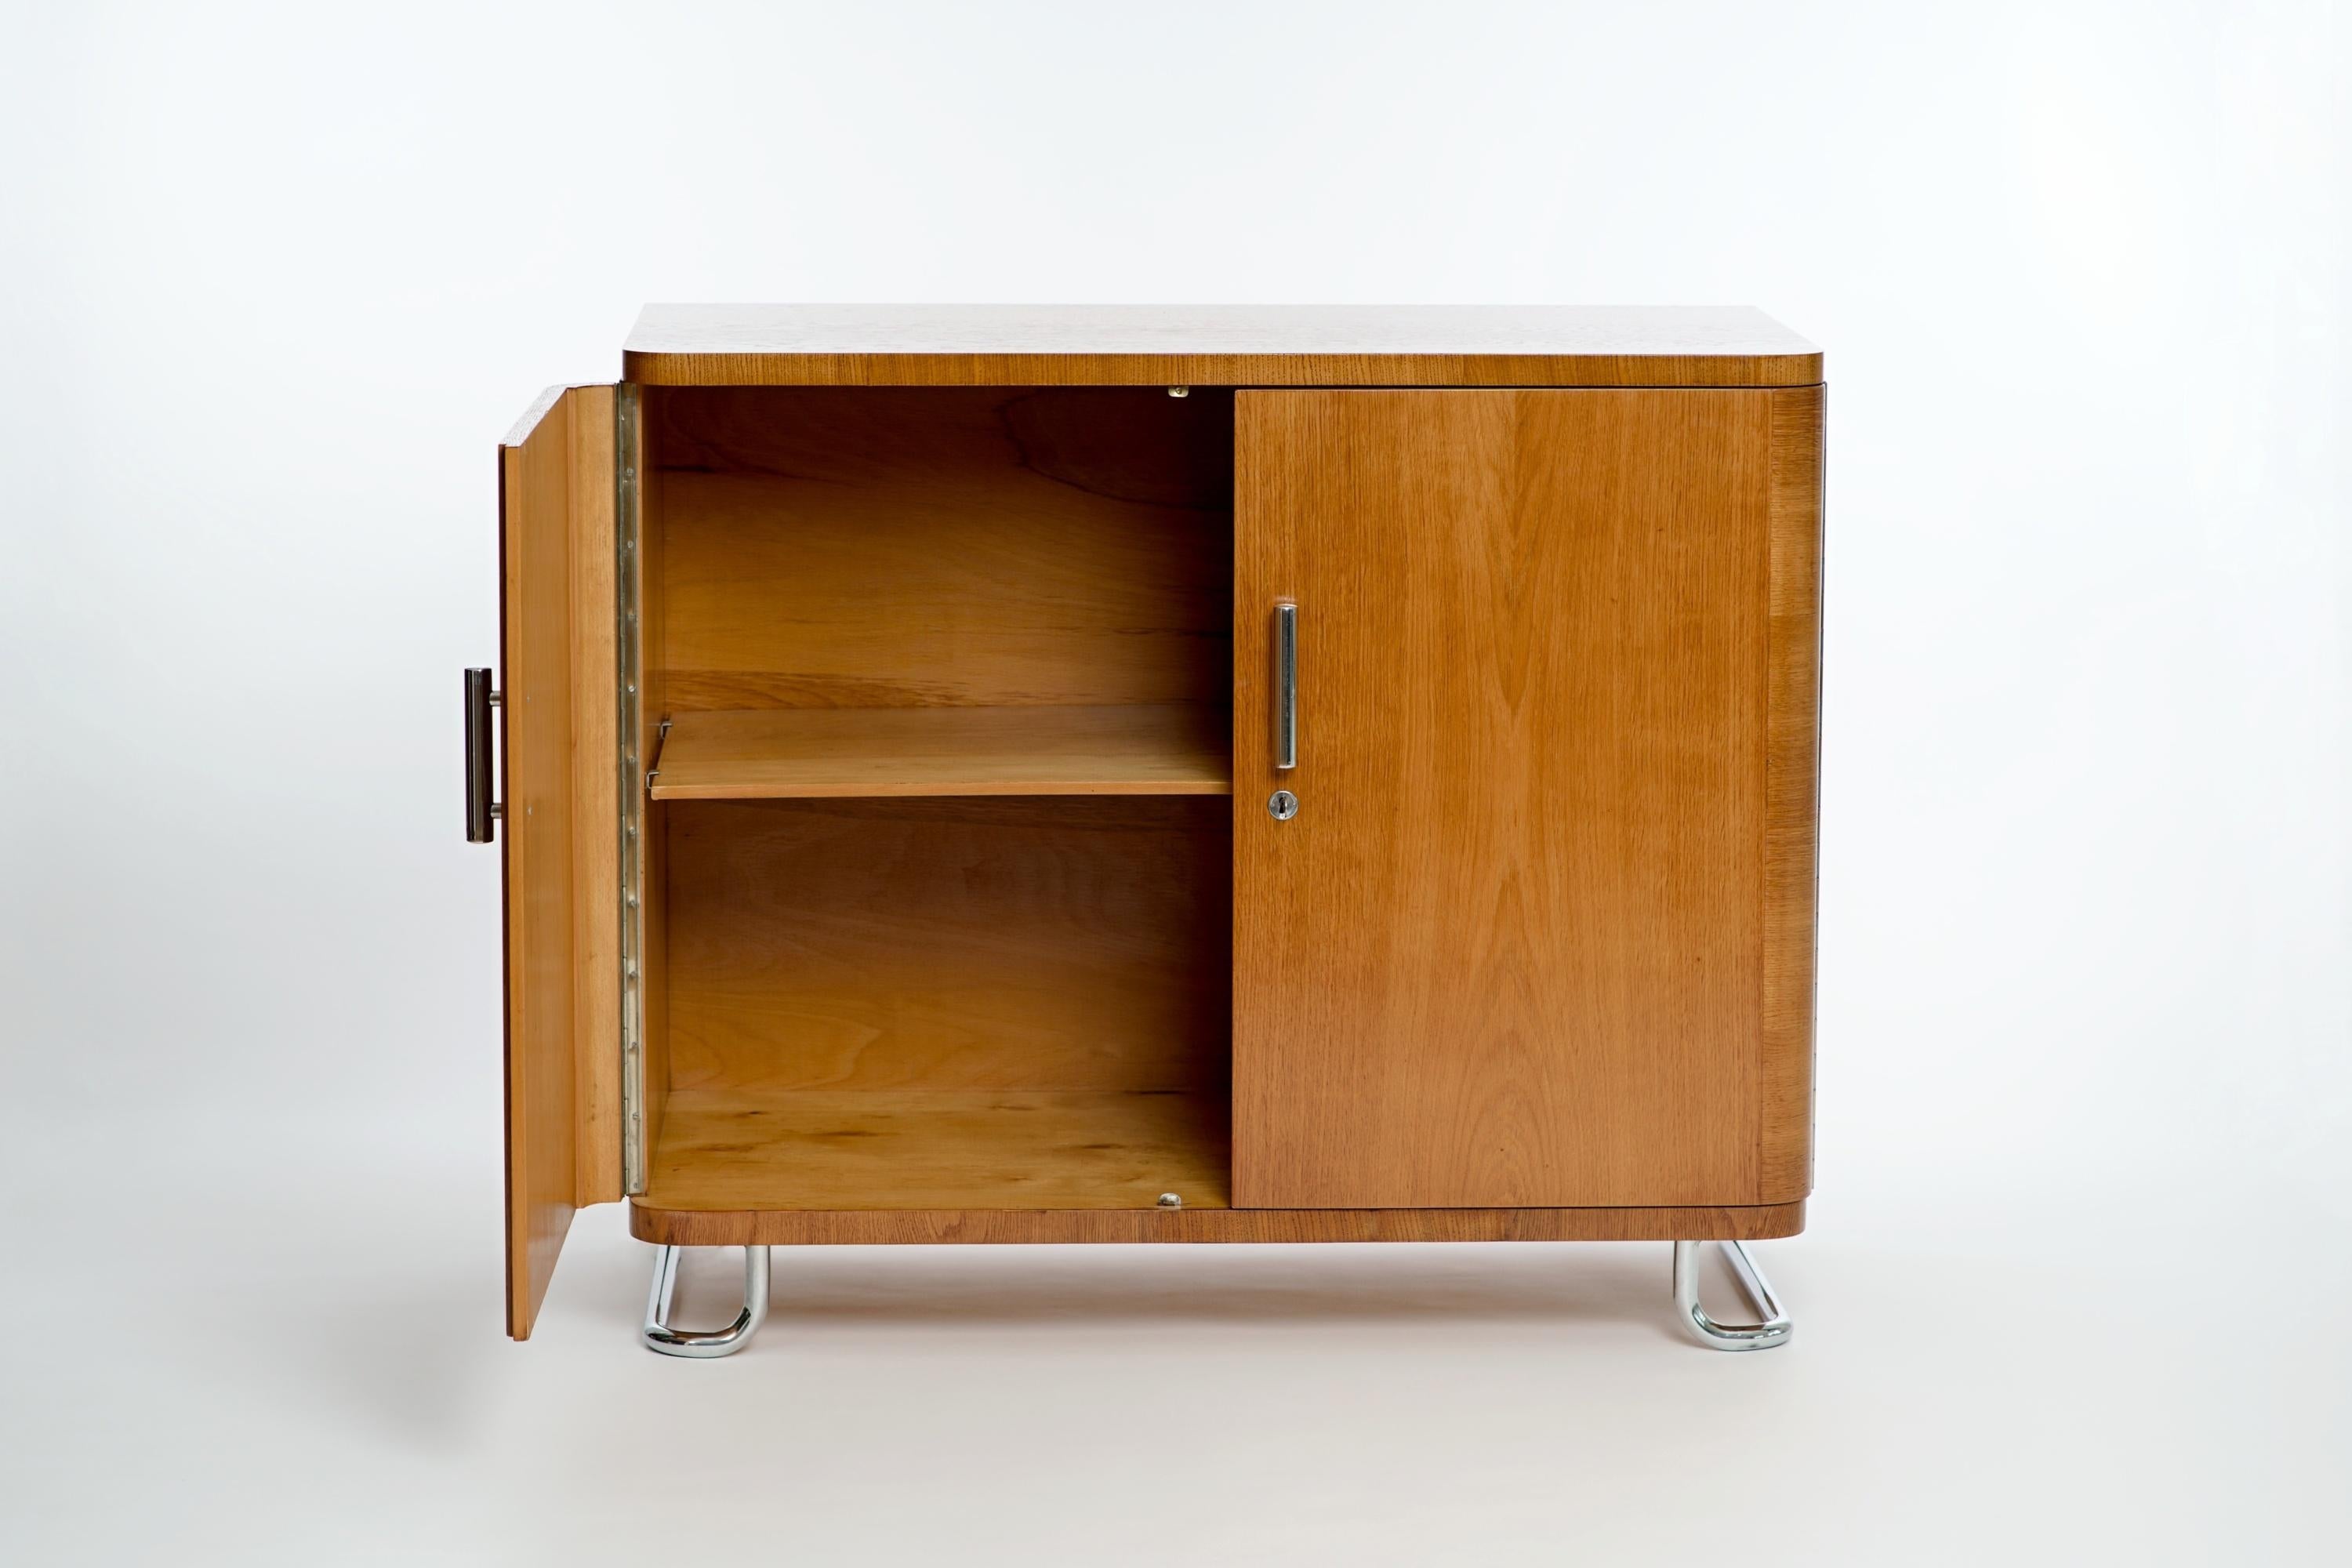 This 2-door sideboard made of oak veneer was made in the former Czechoslovakia in the 1950s. Chromed tubular steel feet and handles. Designed in 1935, executed in the early 1950s. Beautiful restored vintage condition.